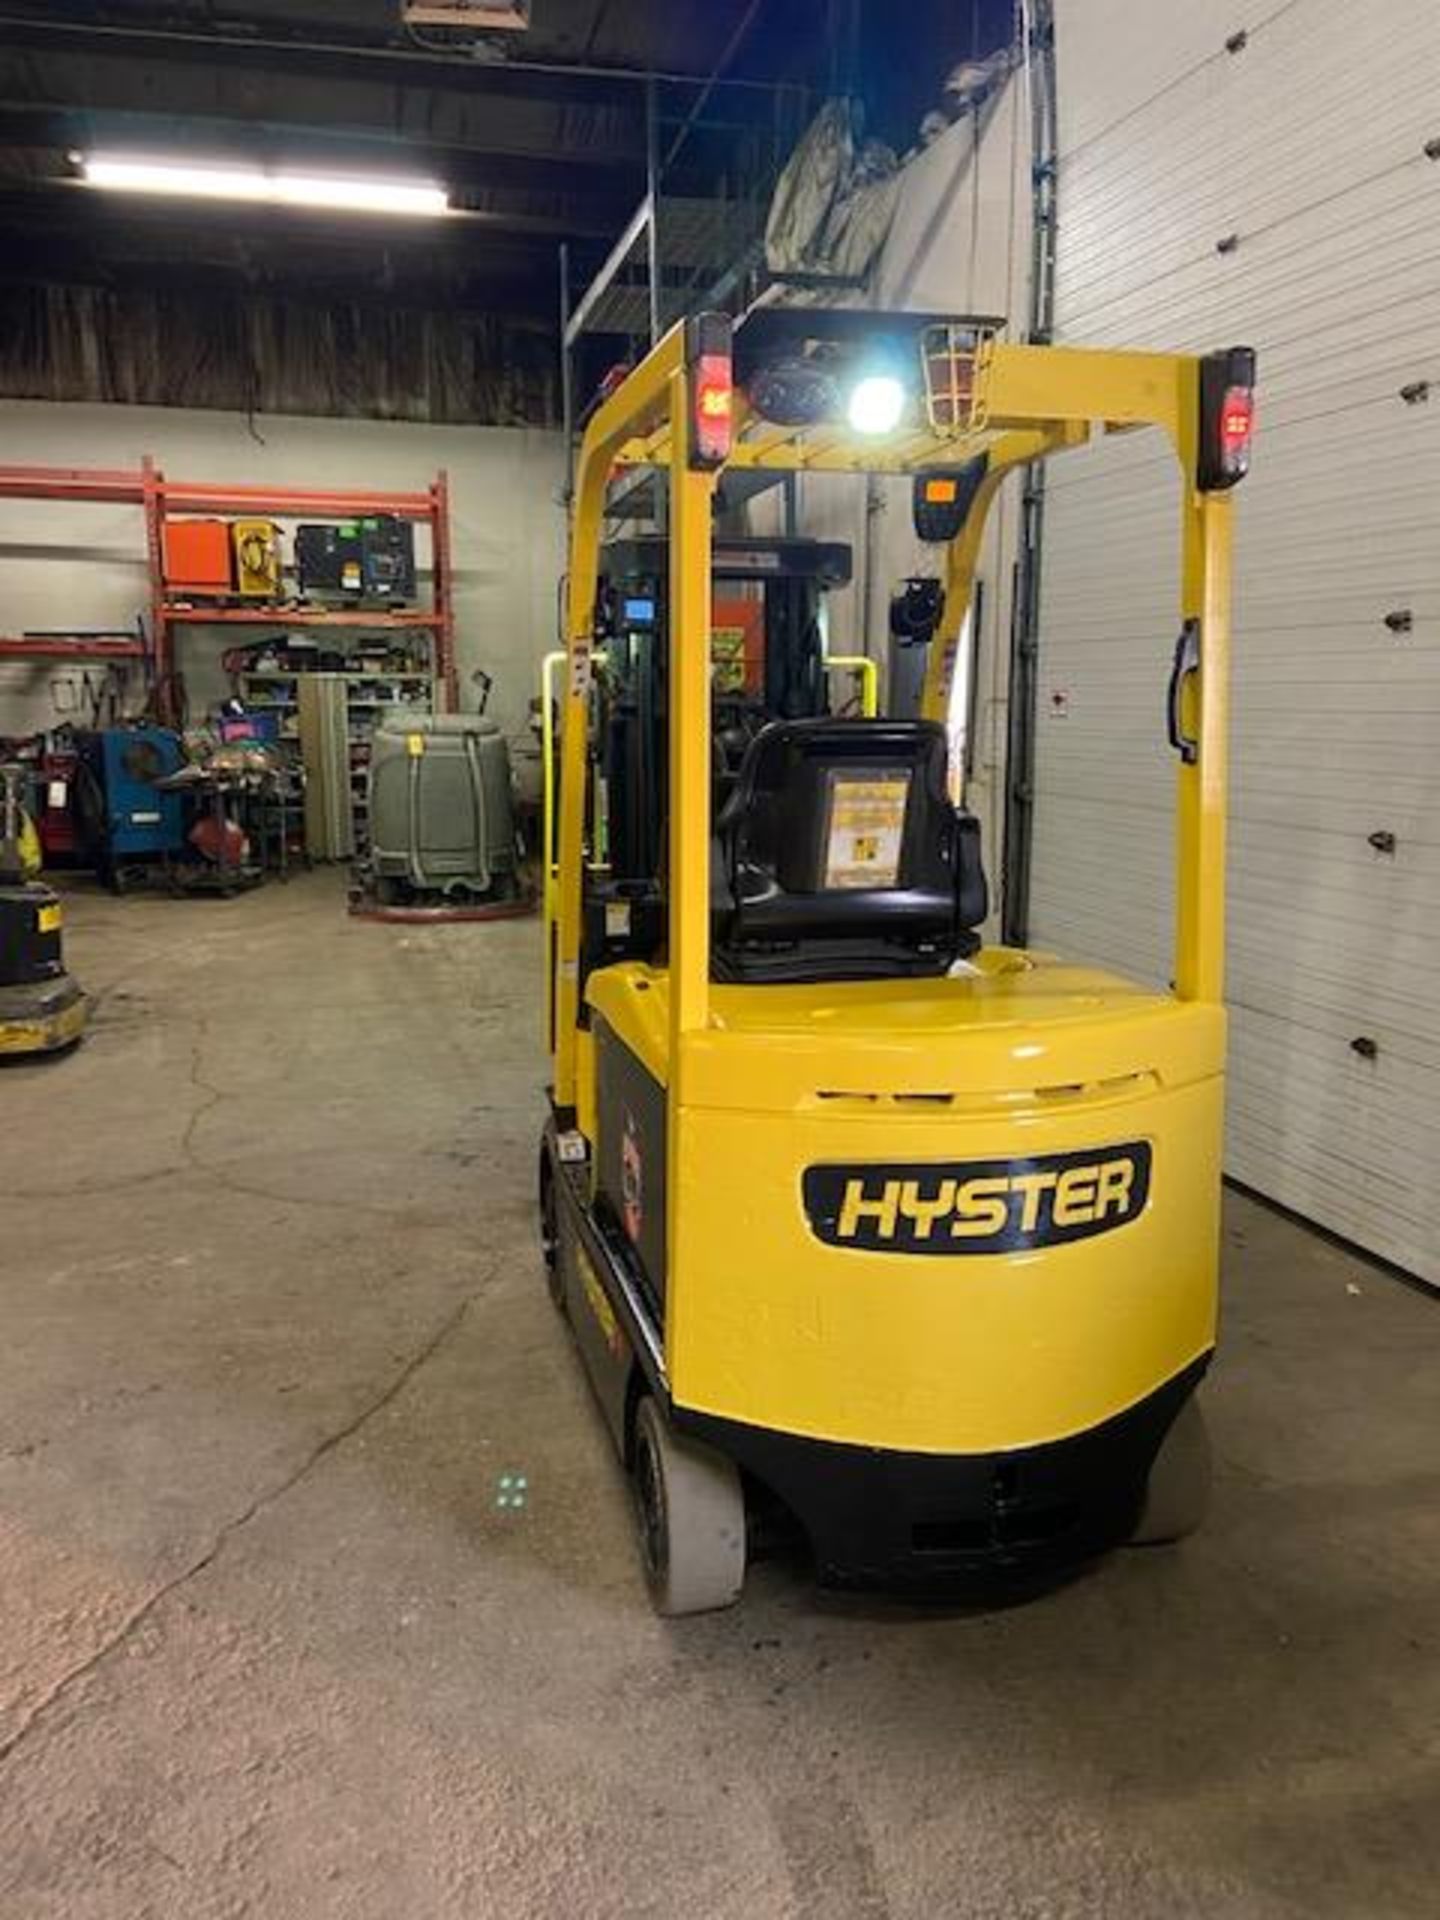 FREE CUSTOMS - 2016 Hyster 5000lbs Capacity Forklift SAFETY INTO 2021 Electric with 3-STAGE MAST - Image 3 of 3